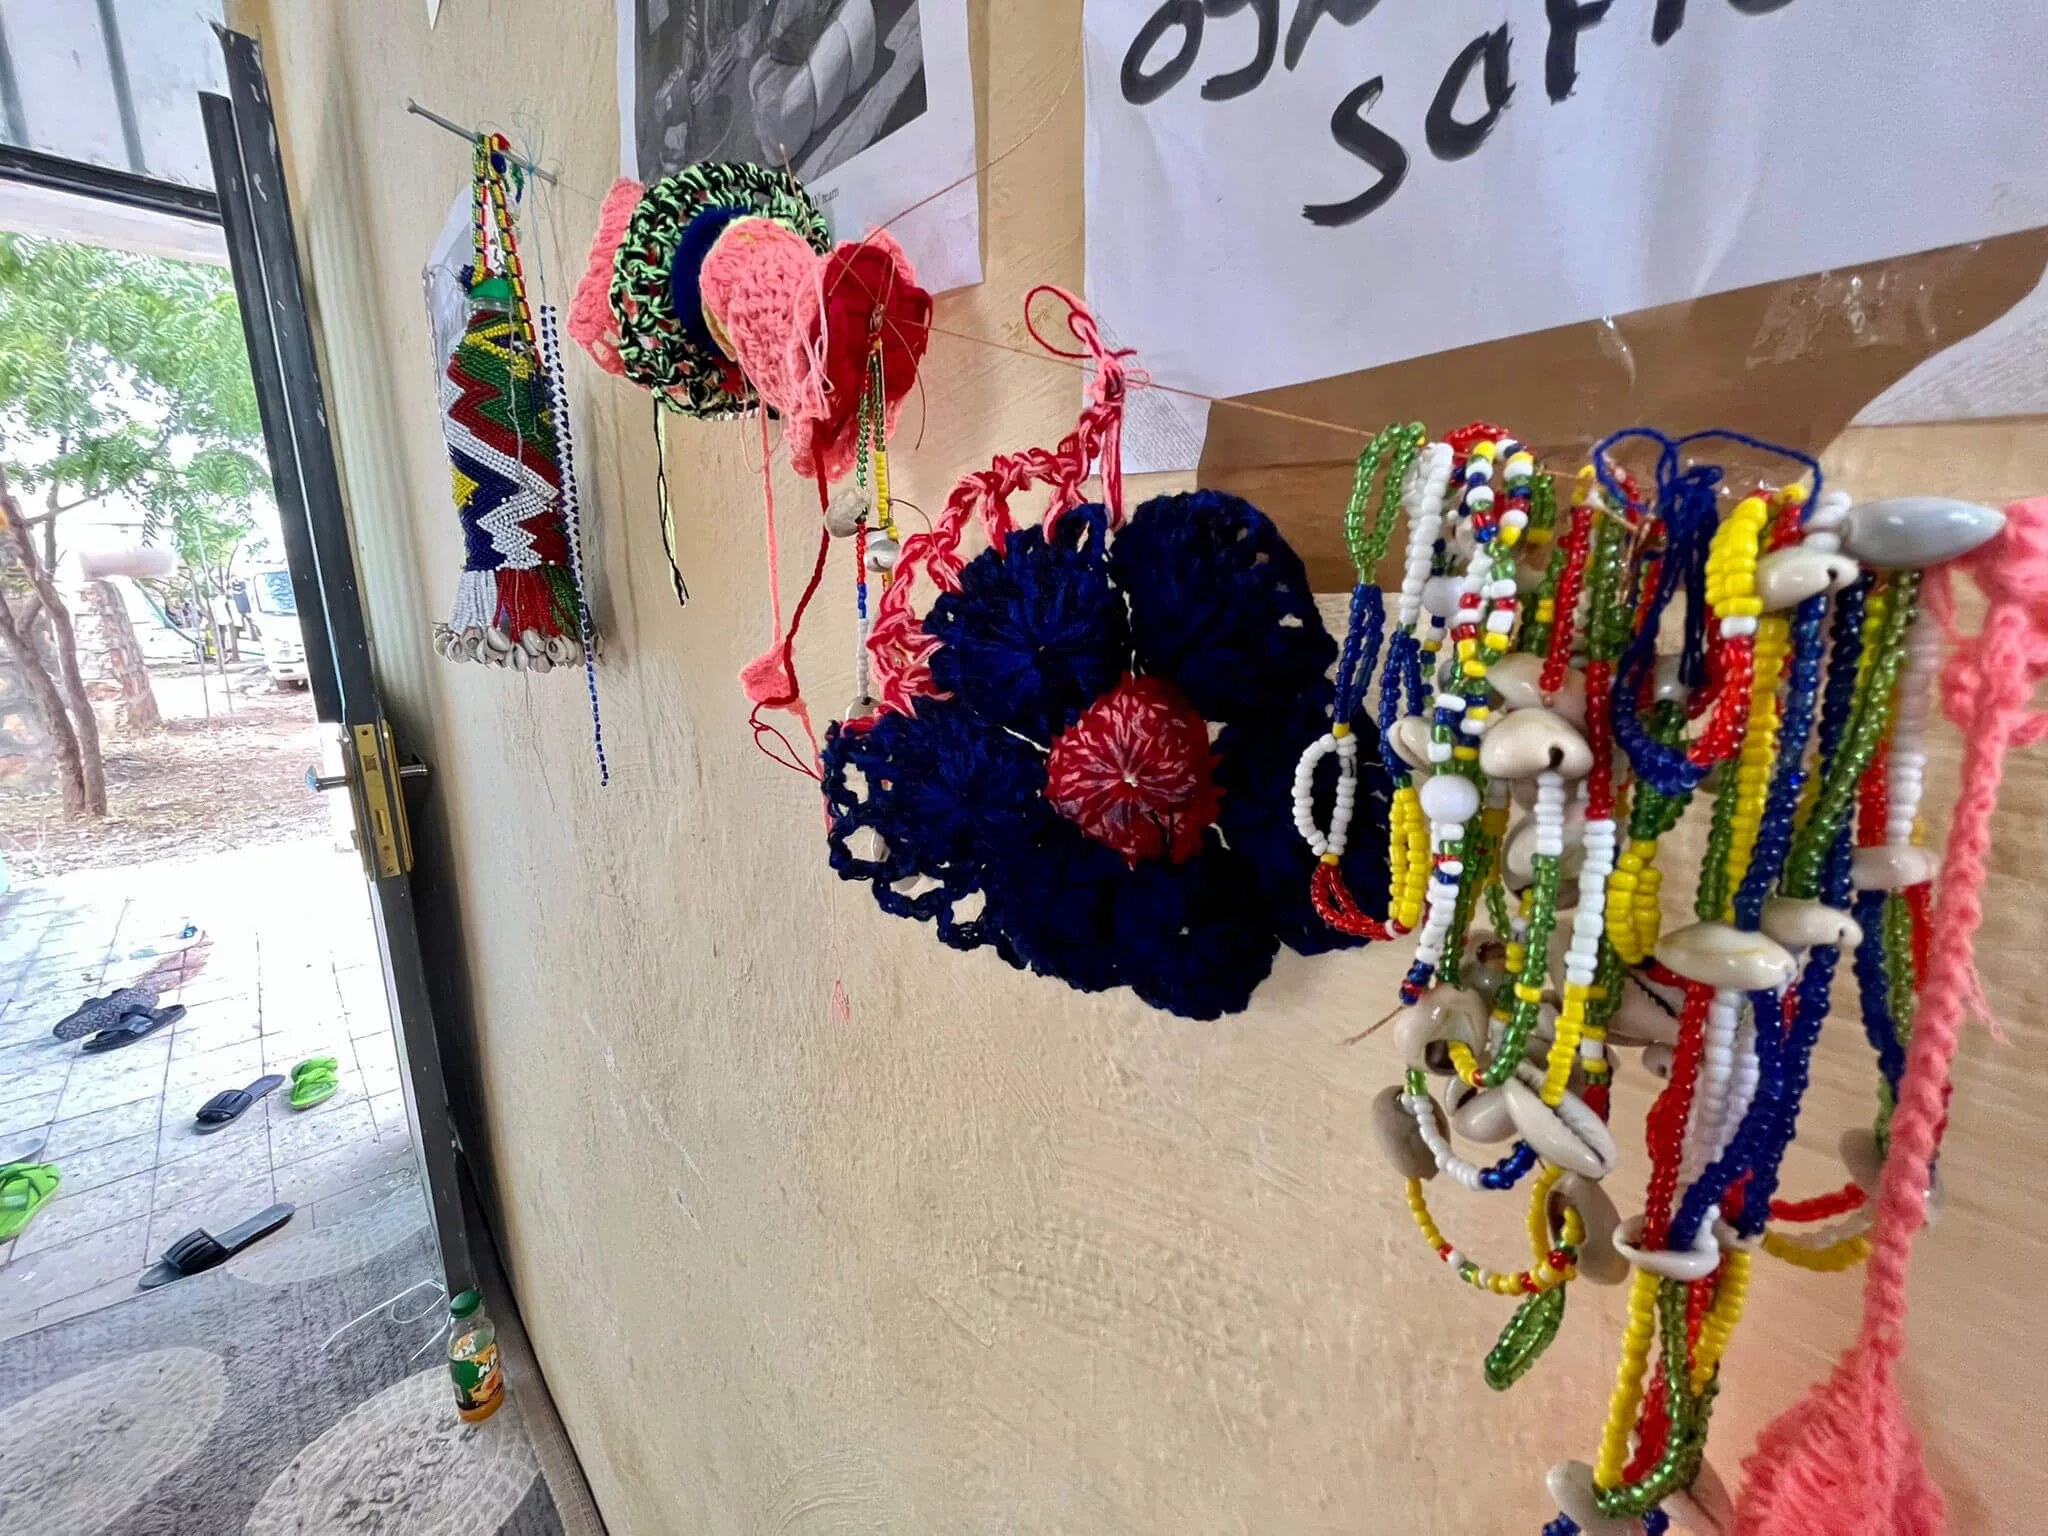 Handmade crafts hang on the walls of the safe space.